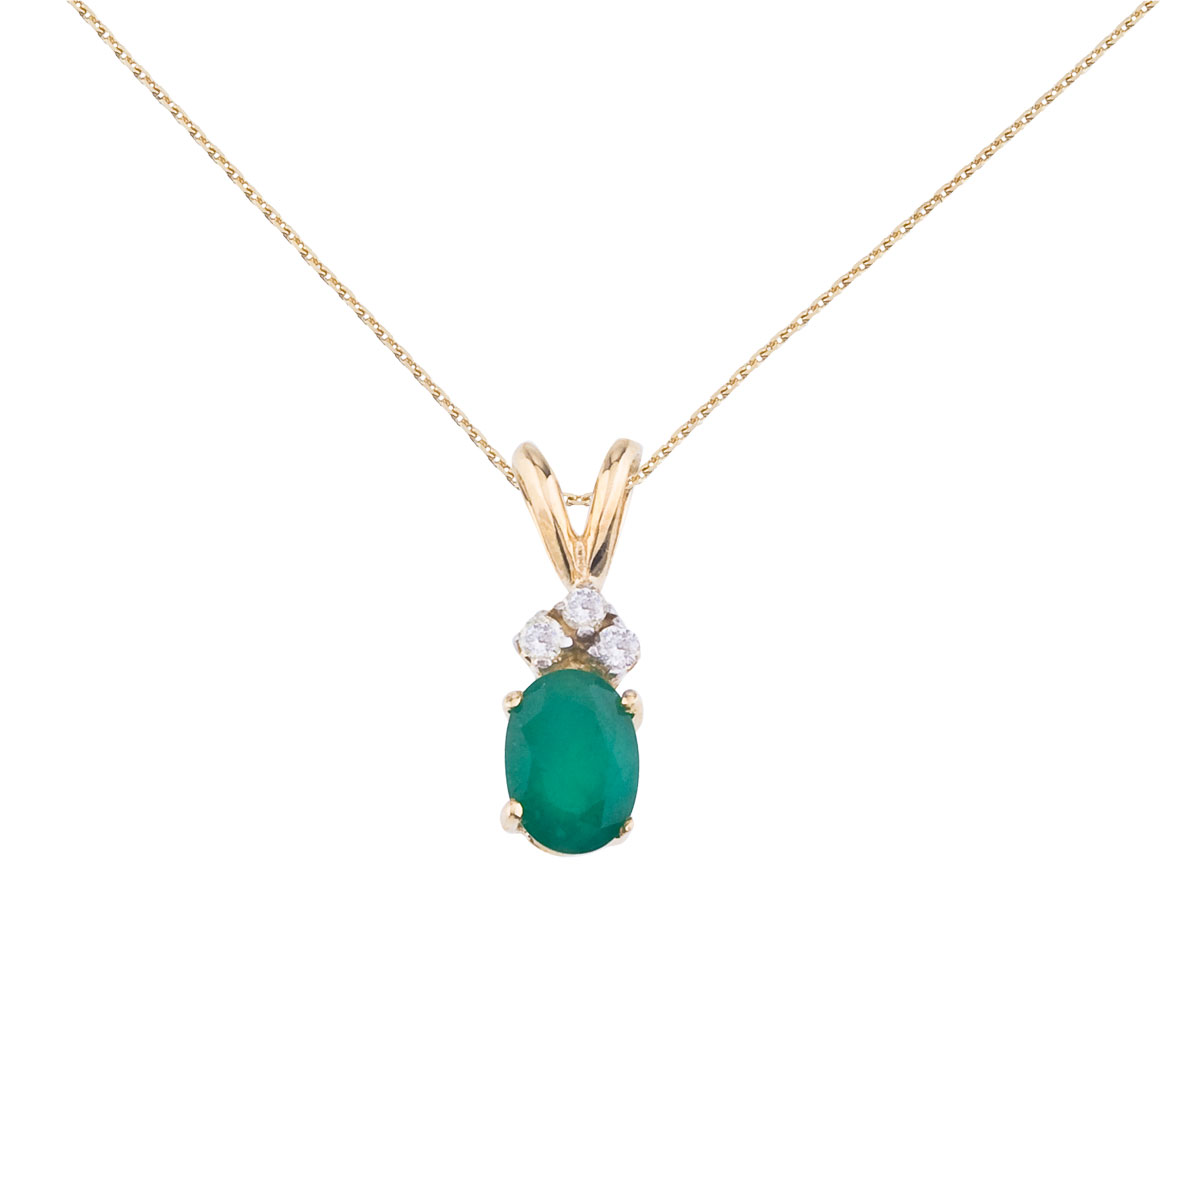 7x5 mm oval natural emerald pendant topped with 3 bright diamonds set in 14k yellow gold.